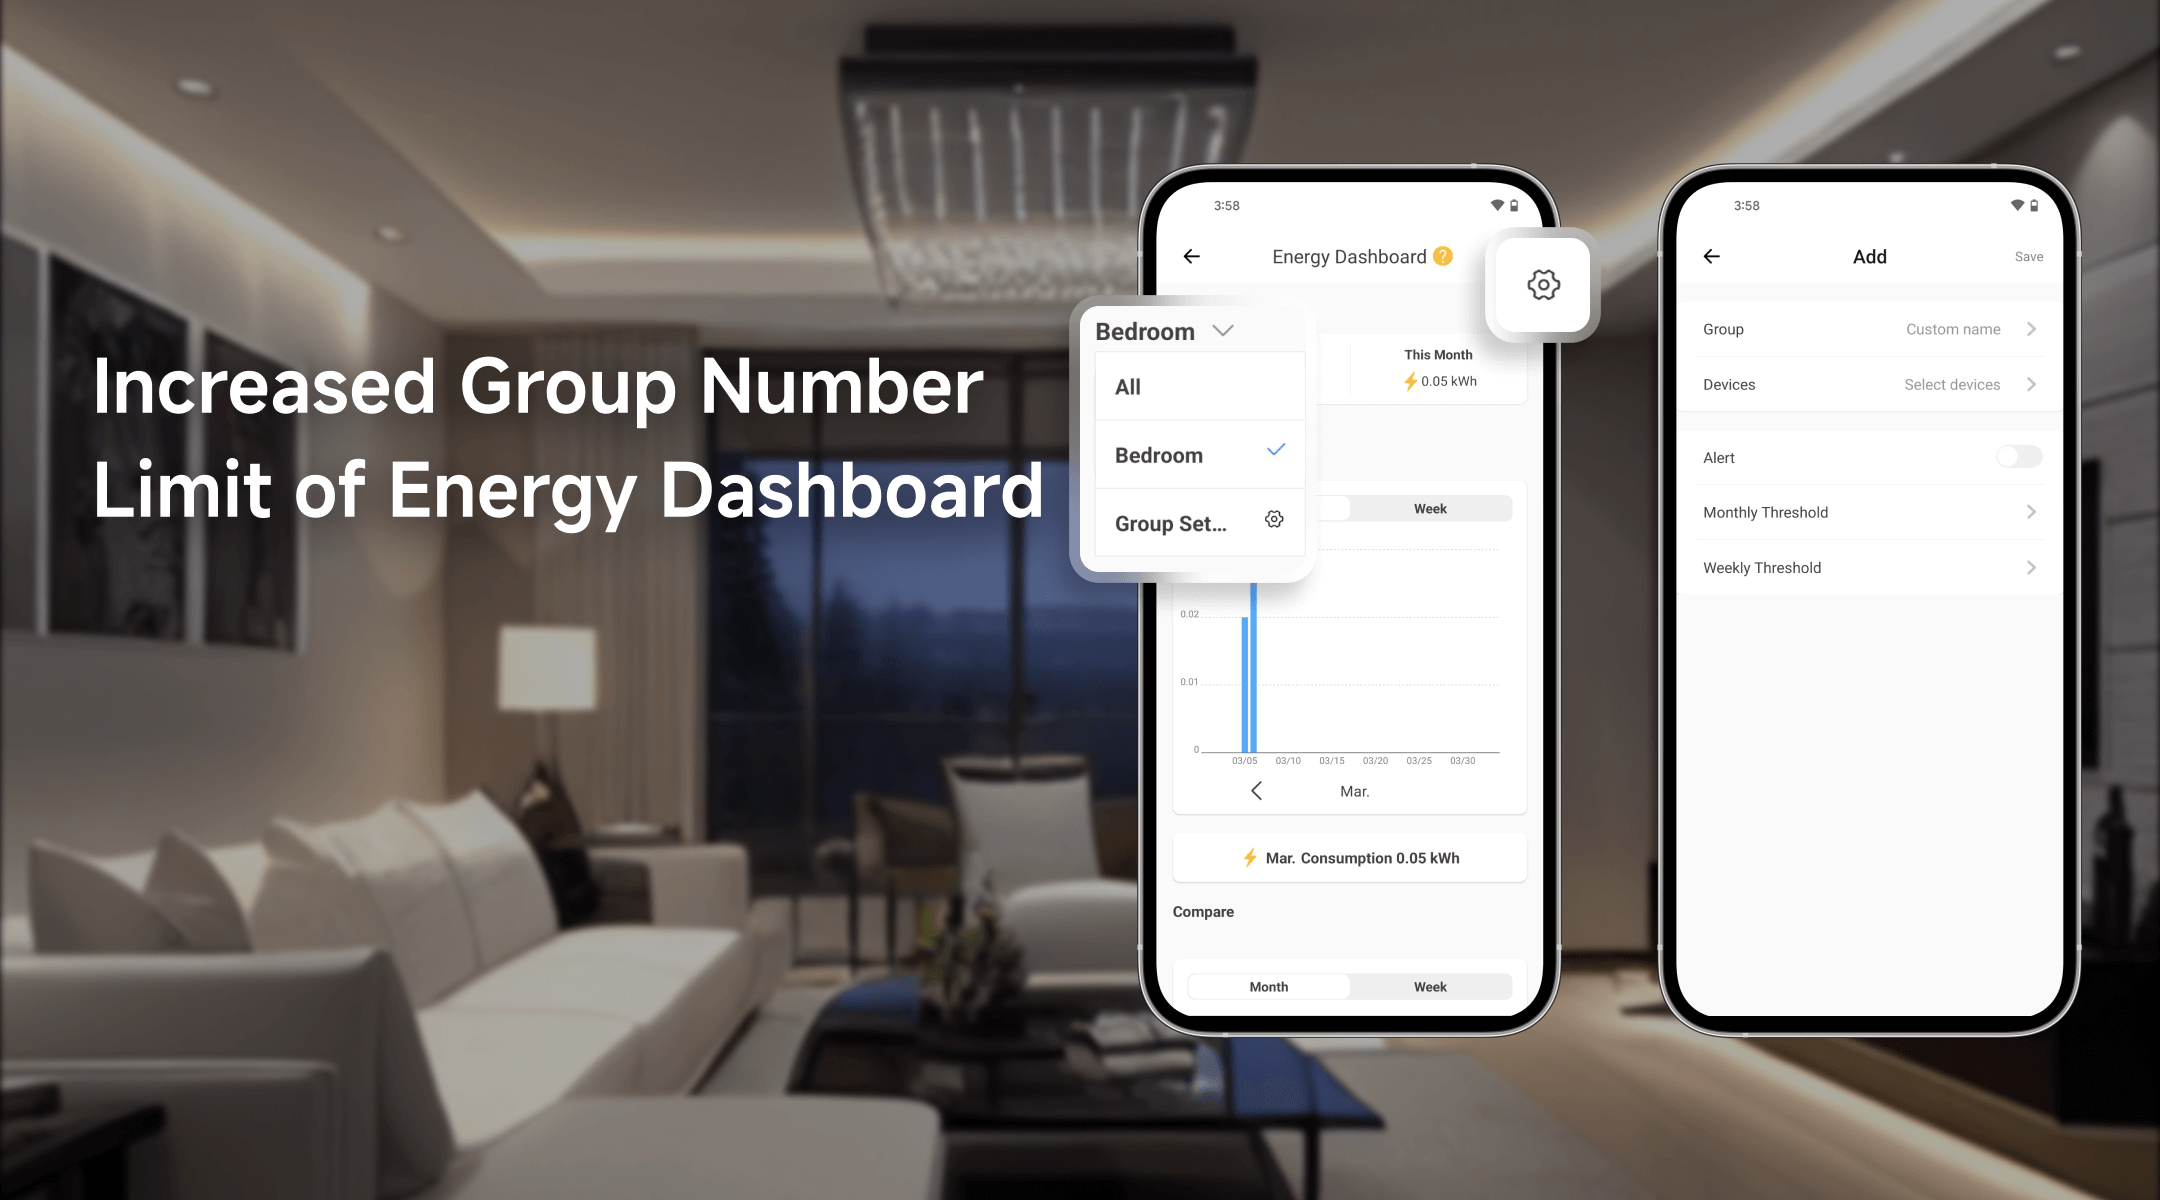 Group Number Limit of Energy Dashboard Increase to 16